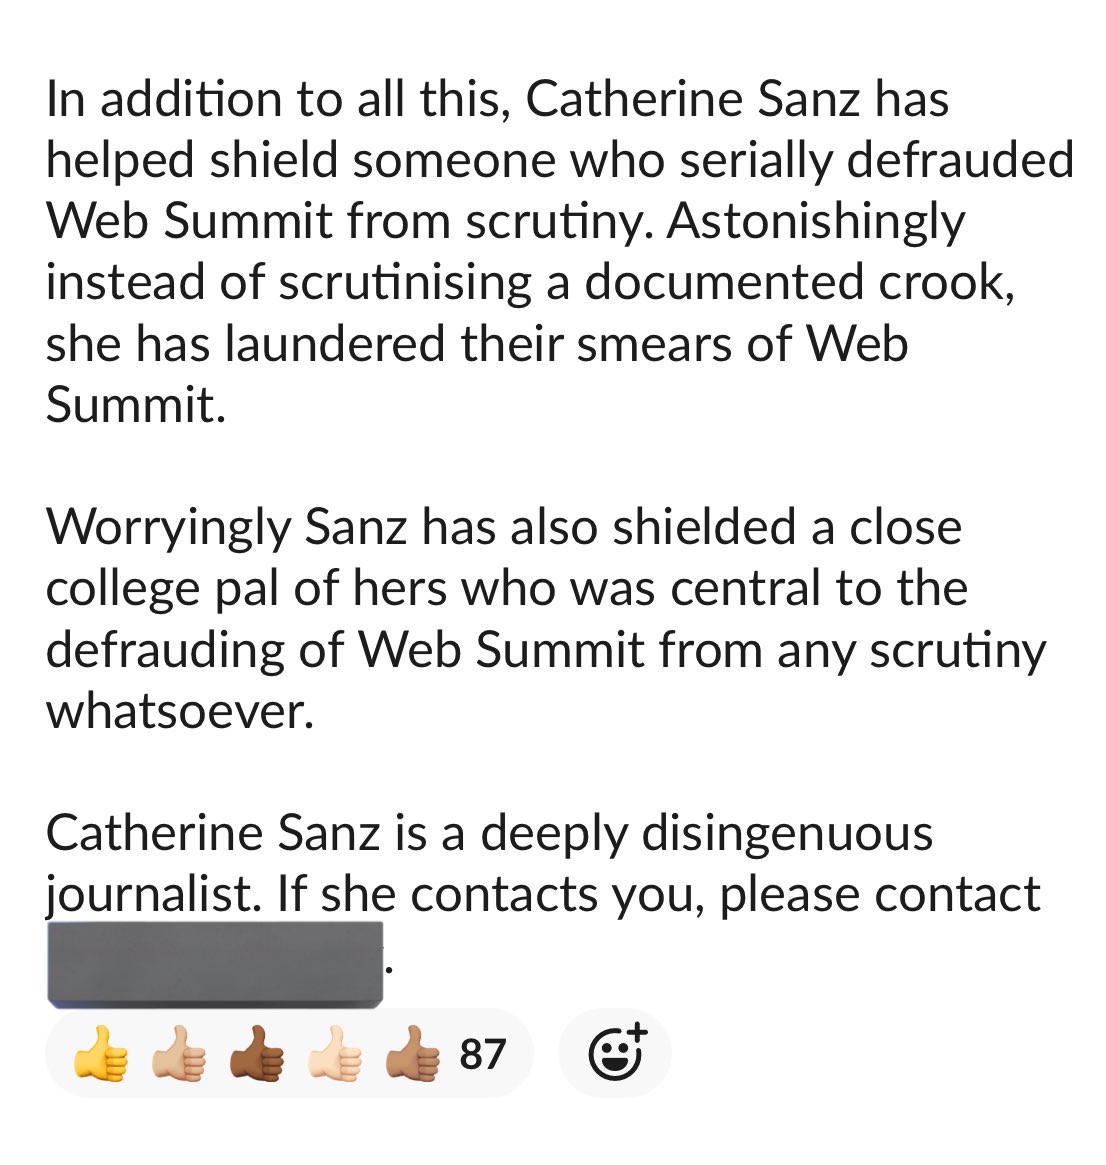 I shared this with all @WebSummit staff globally yesterday. It’s disappointing that an Irish journalist would engage in such activity. I am the largest funder of investigative journalism in Ireland & organiser of one of the world’s largest conferences on the future of media,…